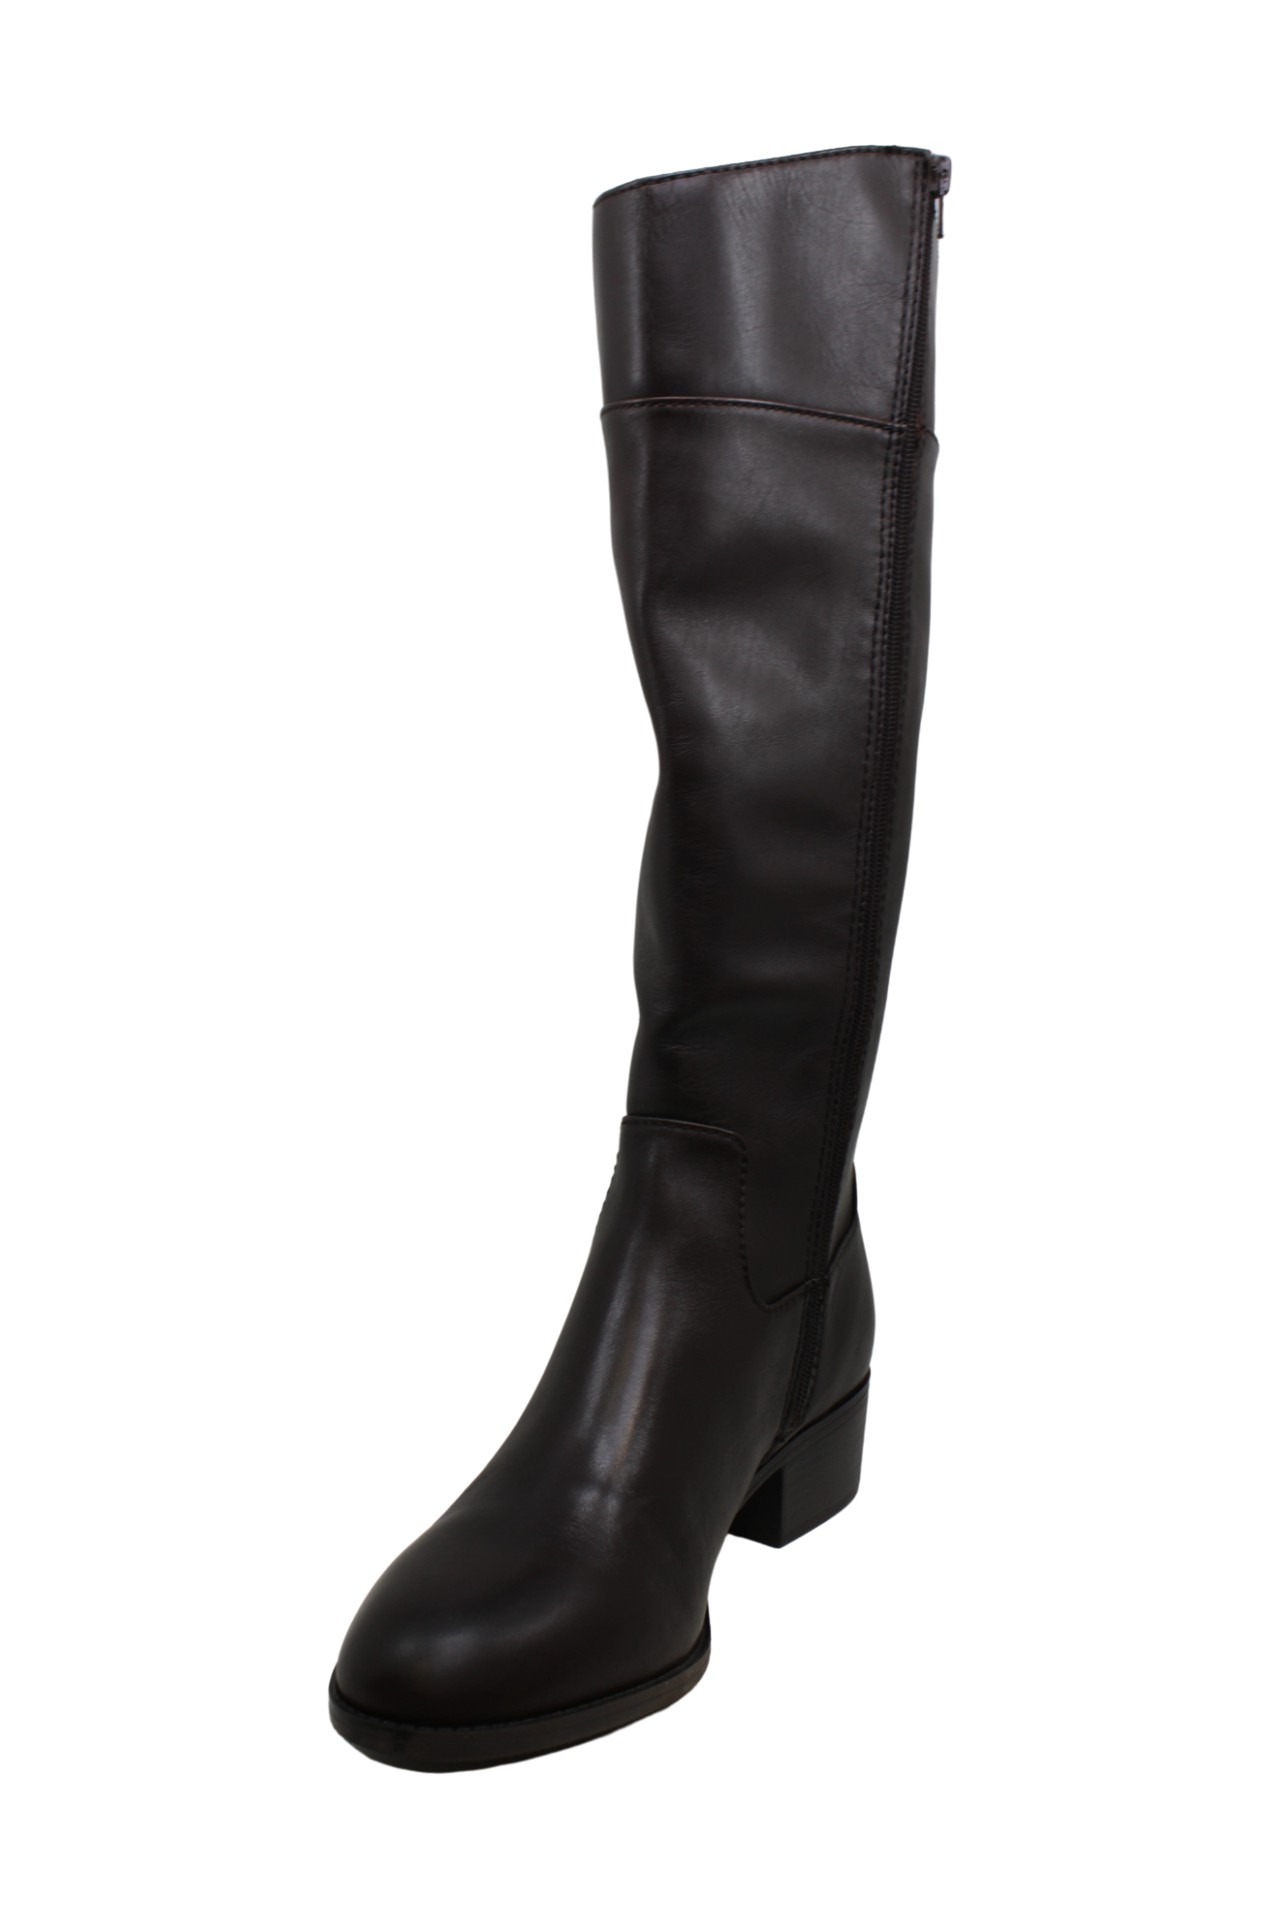 Alfani Womens Bexleyy Leather Almond Toe Knee High Riding, Brown, Size